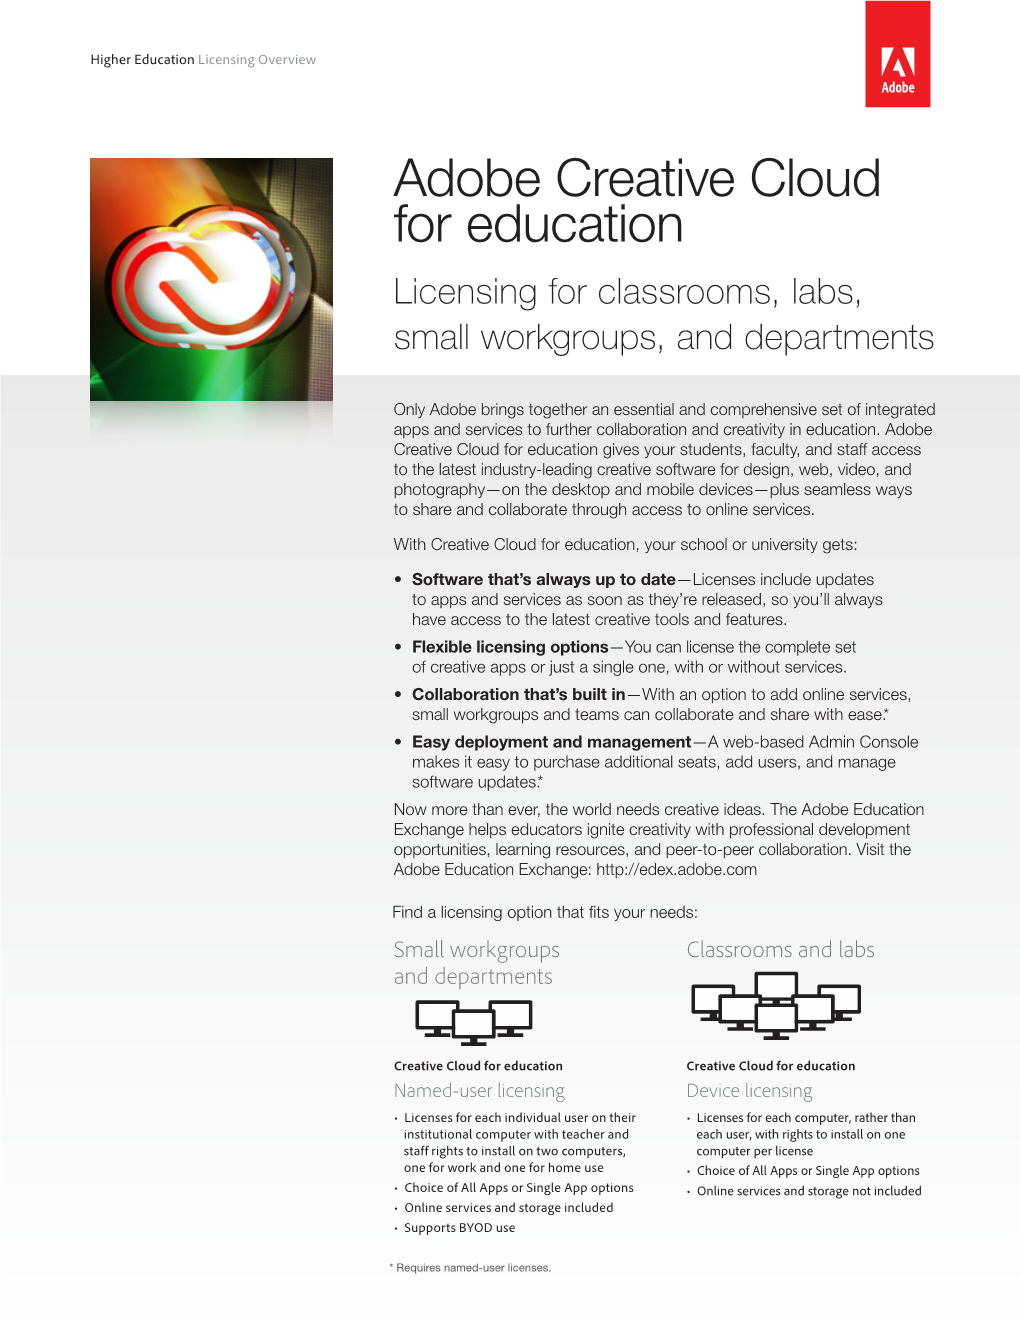 Adobe Creative Cloud for Education Licensing for Classrooms, Labs, Small Workgroups, and Departments